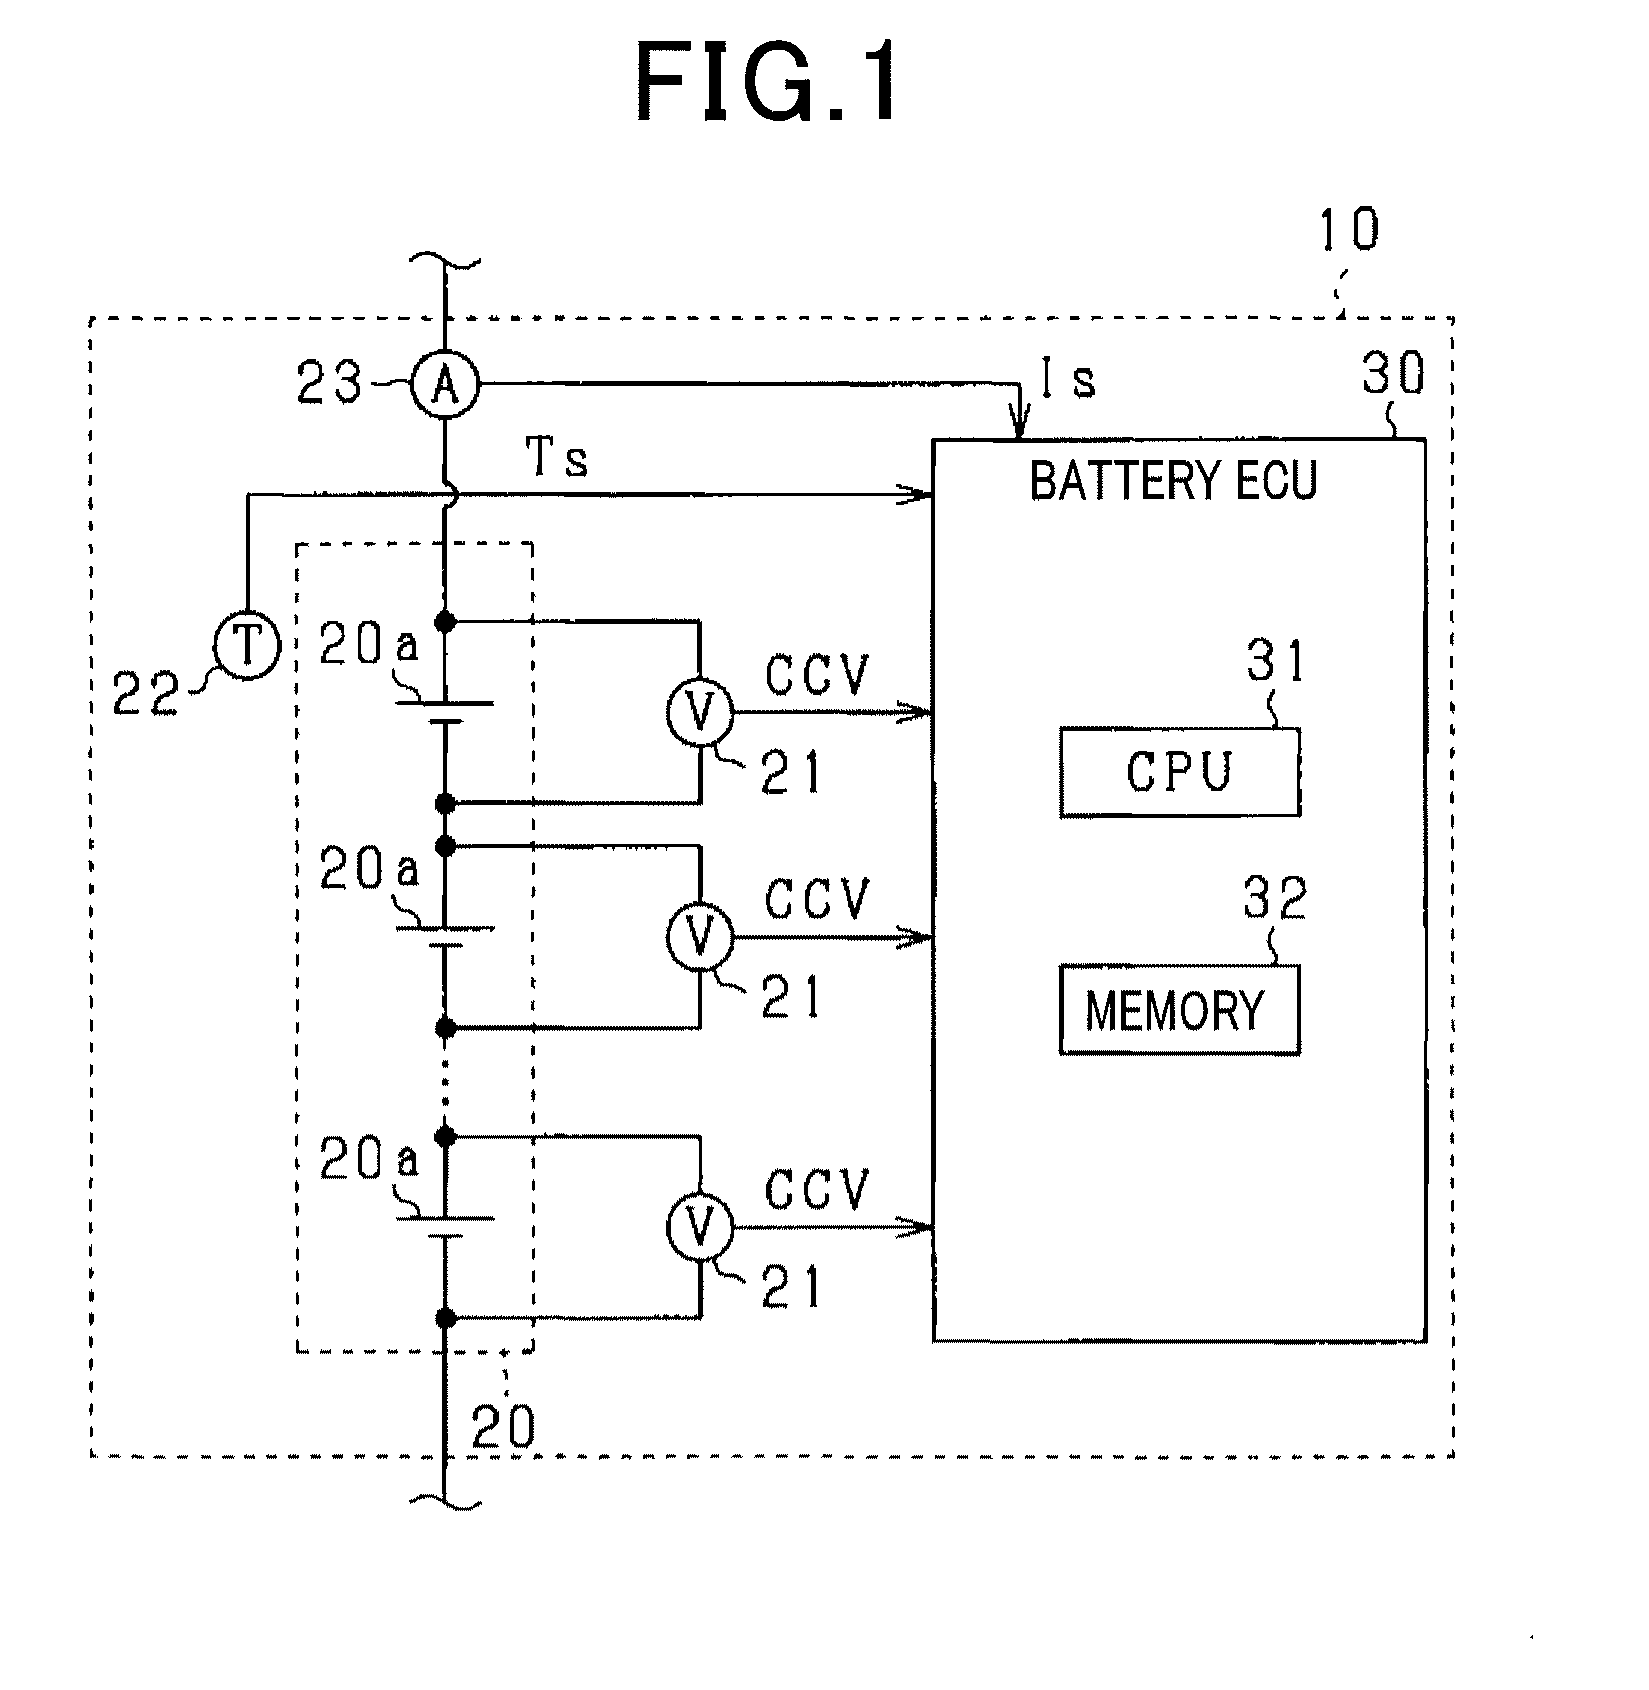 Battery state estimation apparatus